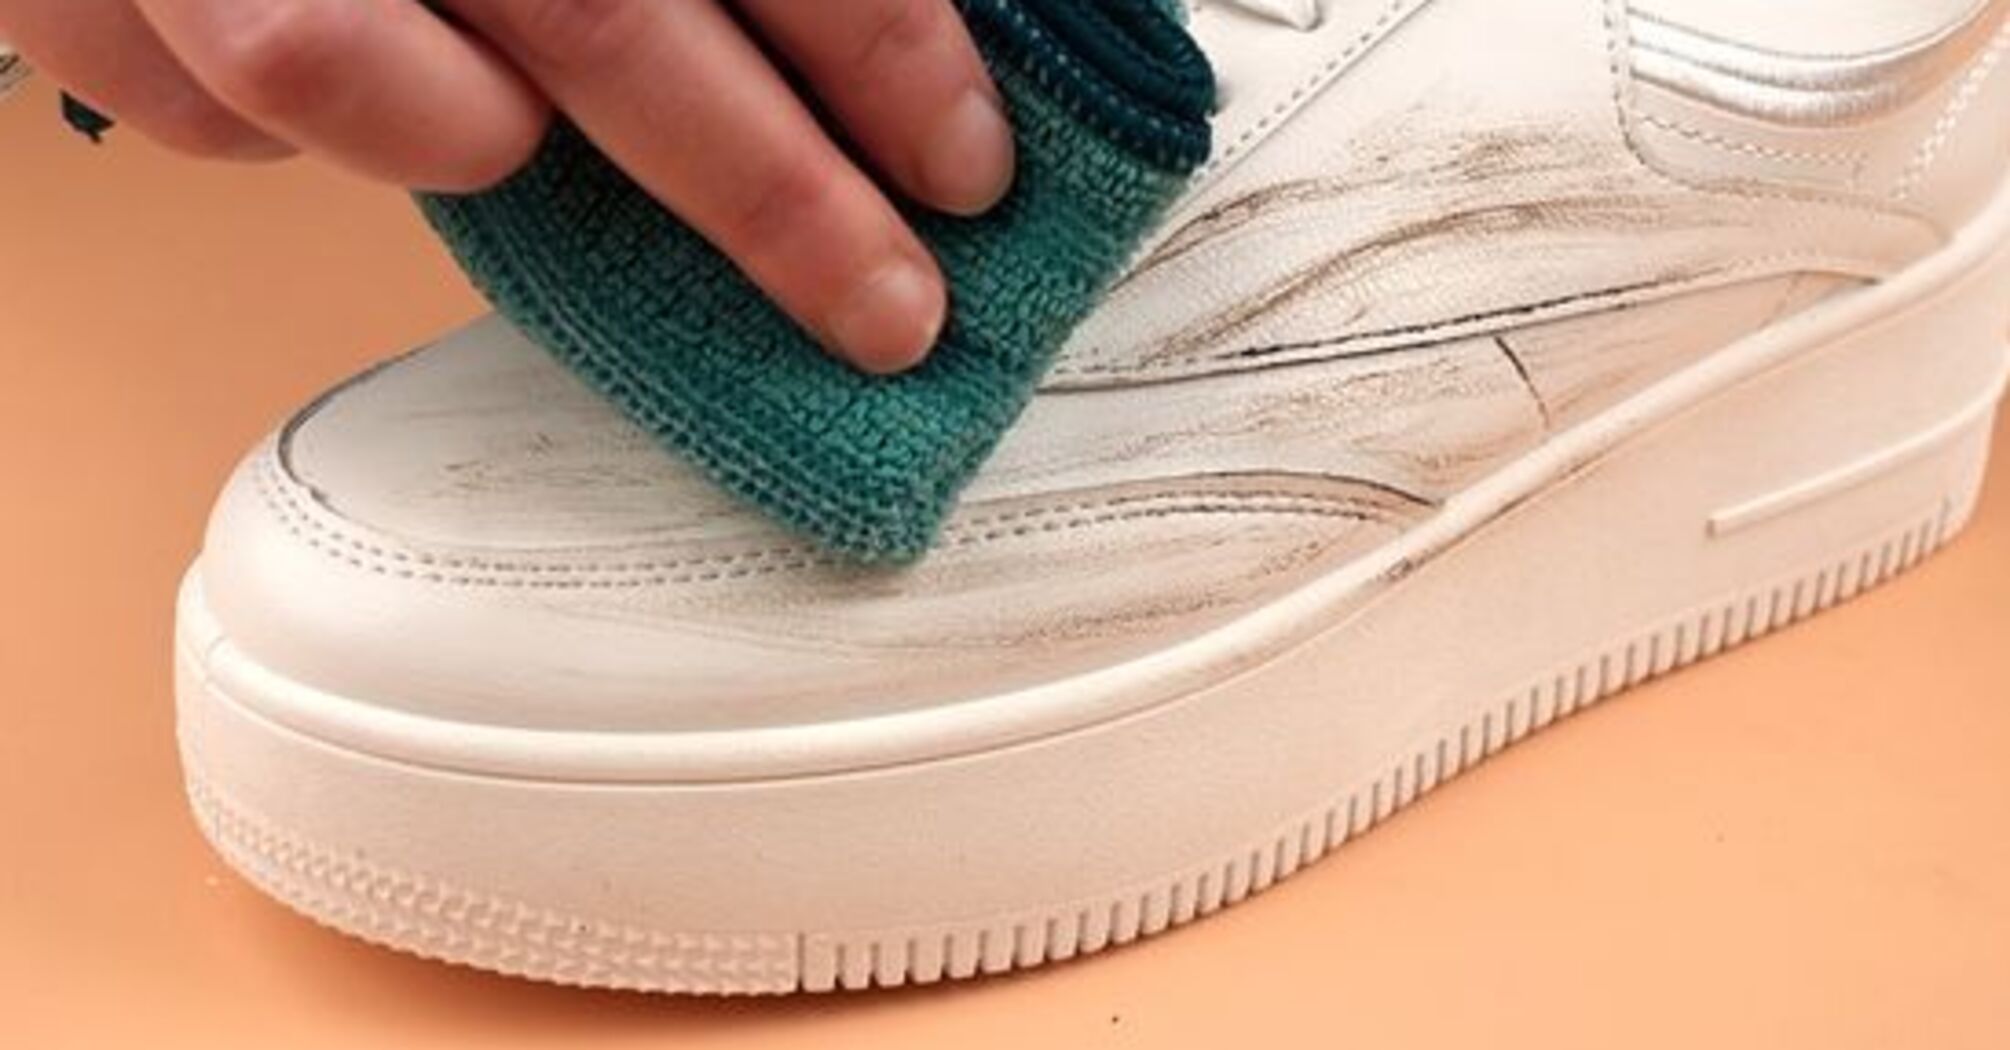 How to regain previous look of dirty shoes